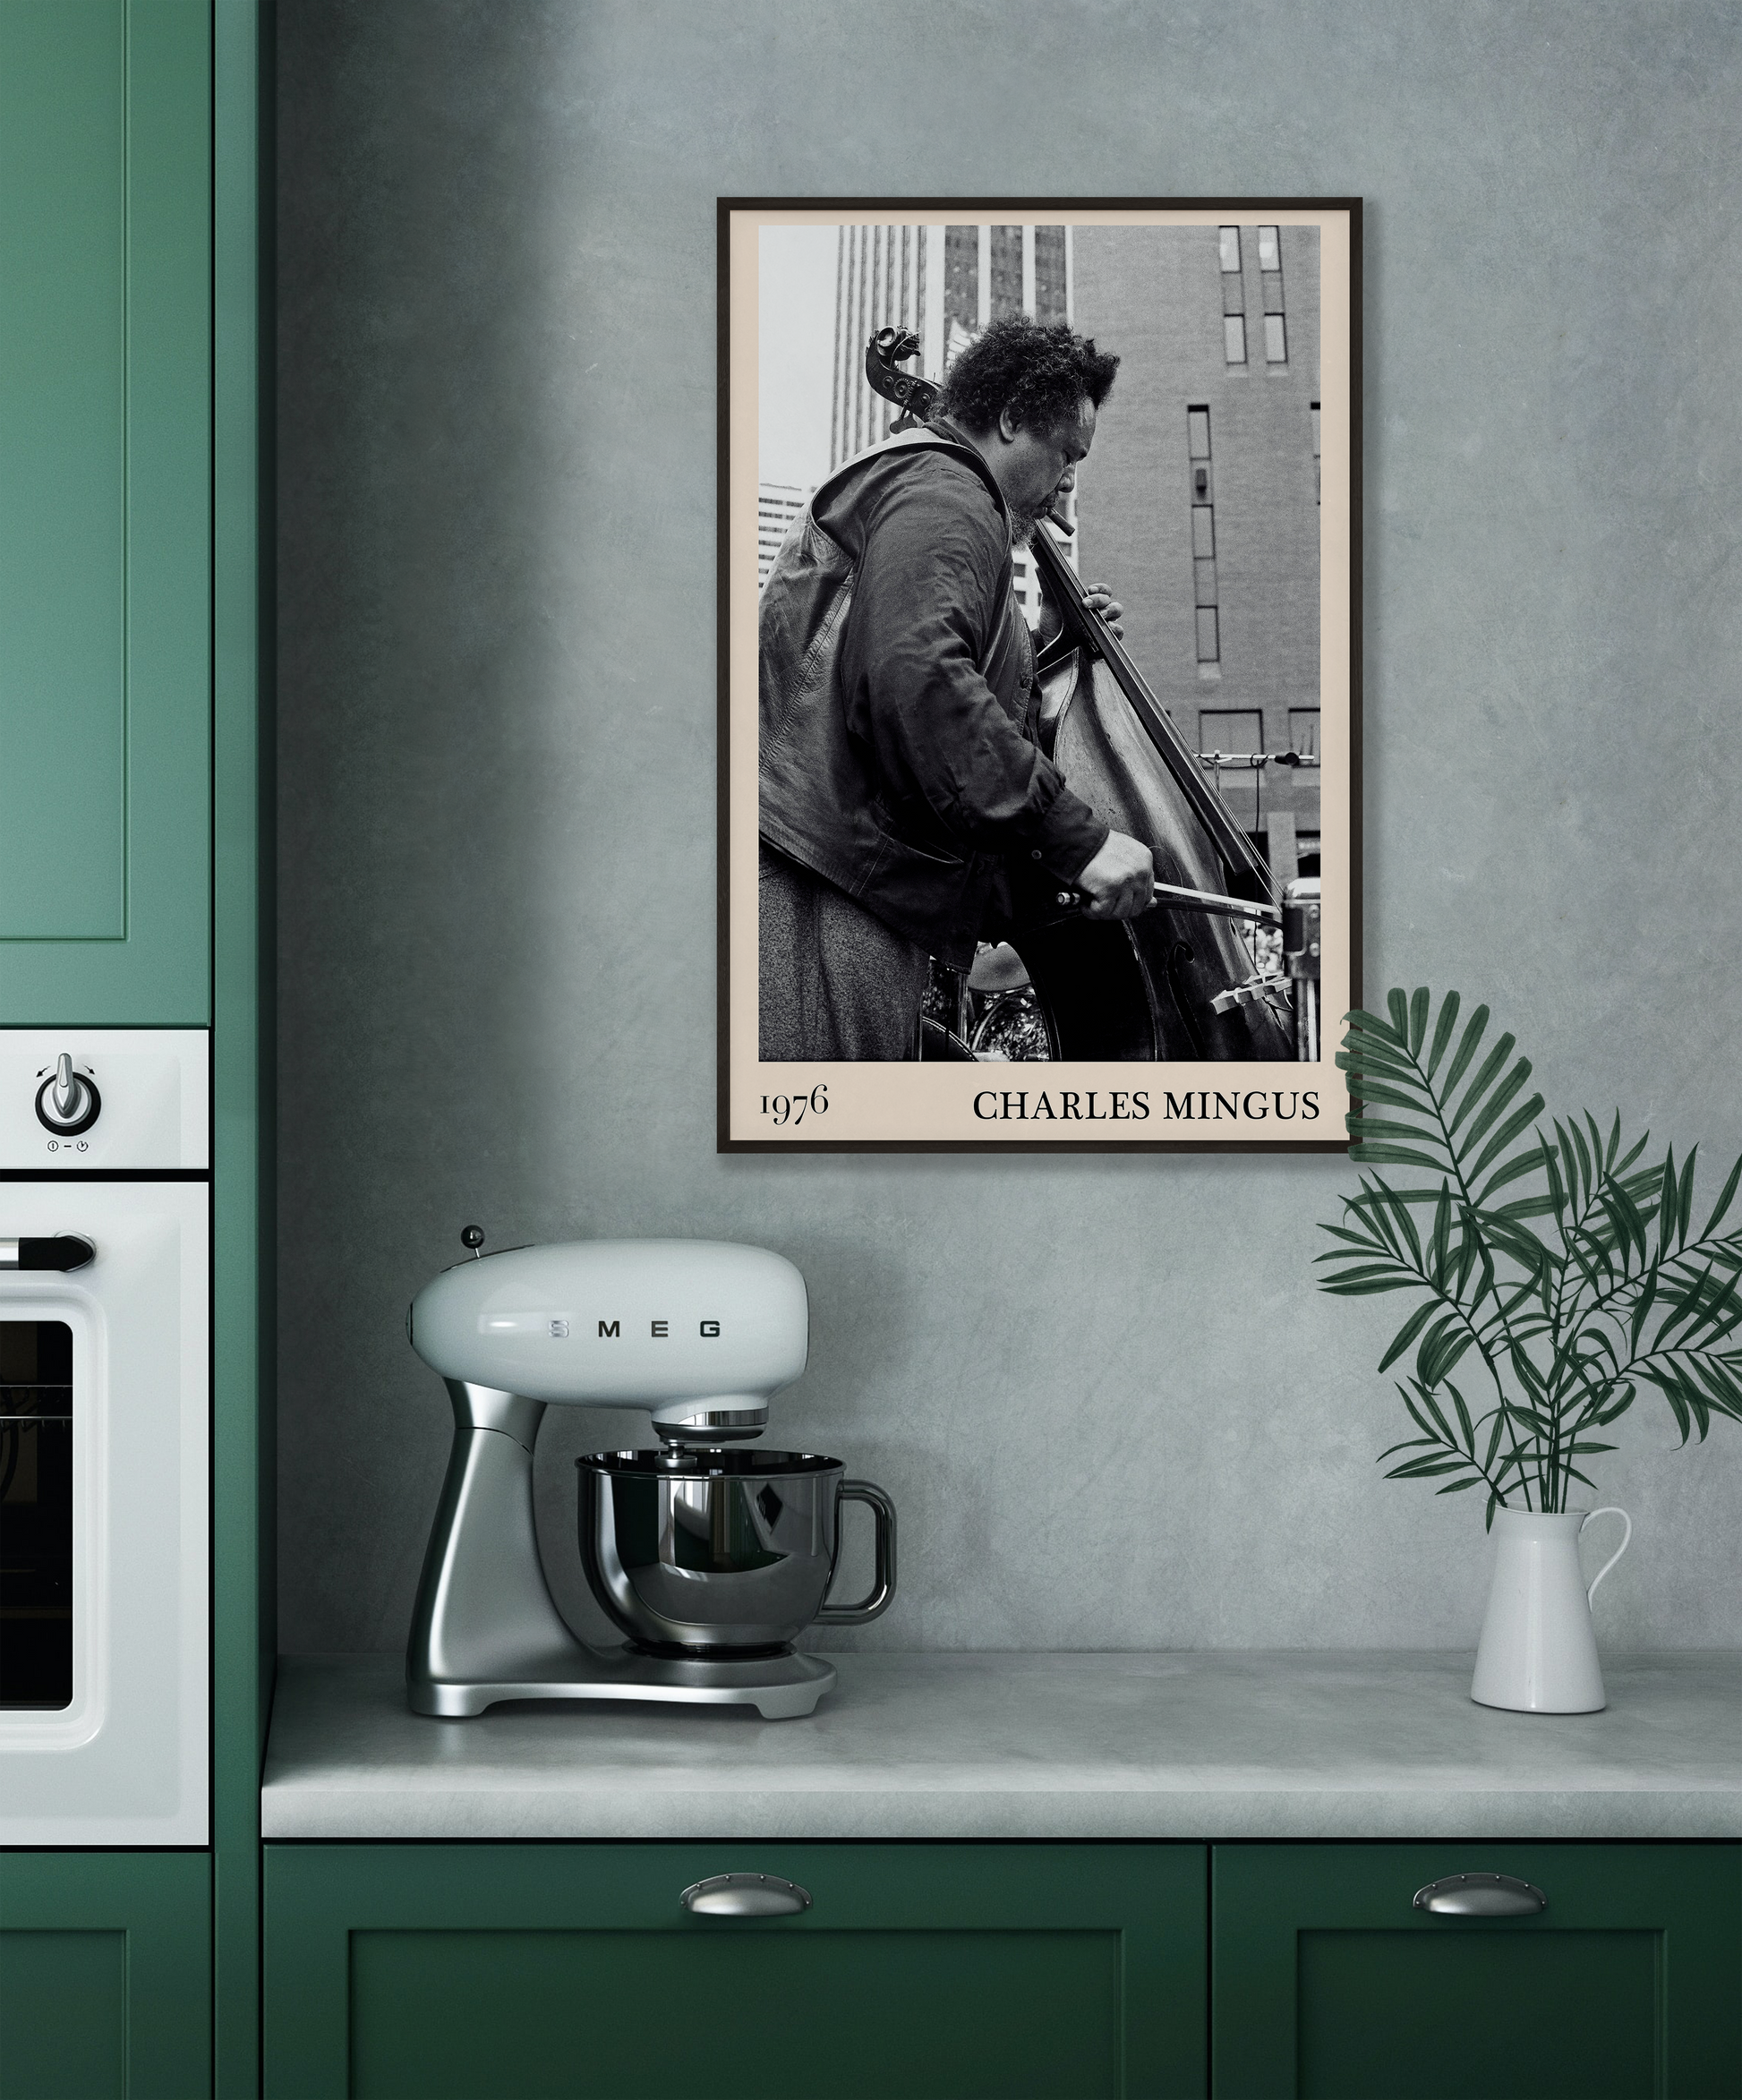 1976 photograph of Charles Mingus taken by Thomas Marcello. Picture crafted into a cool black framed music print, with an off-white border. Poster is hanging on a grey kitchen wall.